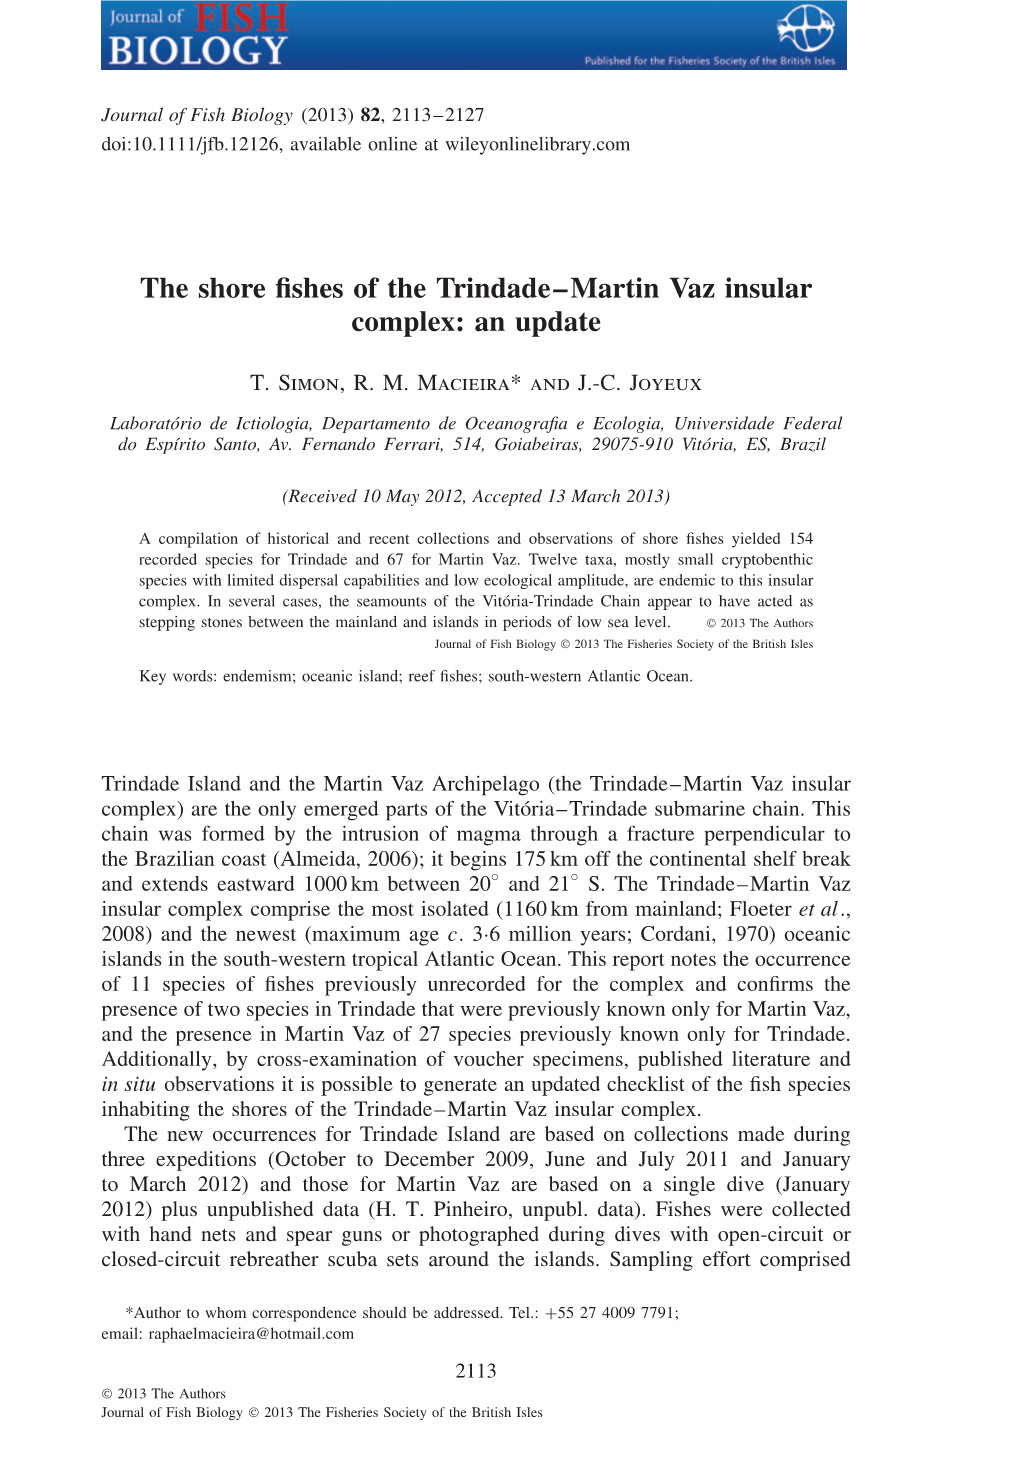 The Shore Fishes of the Trindademartin Vaz Insular